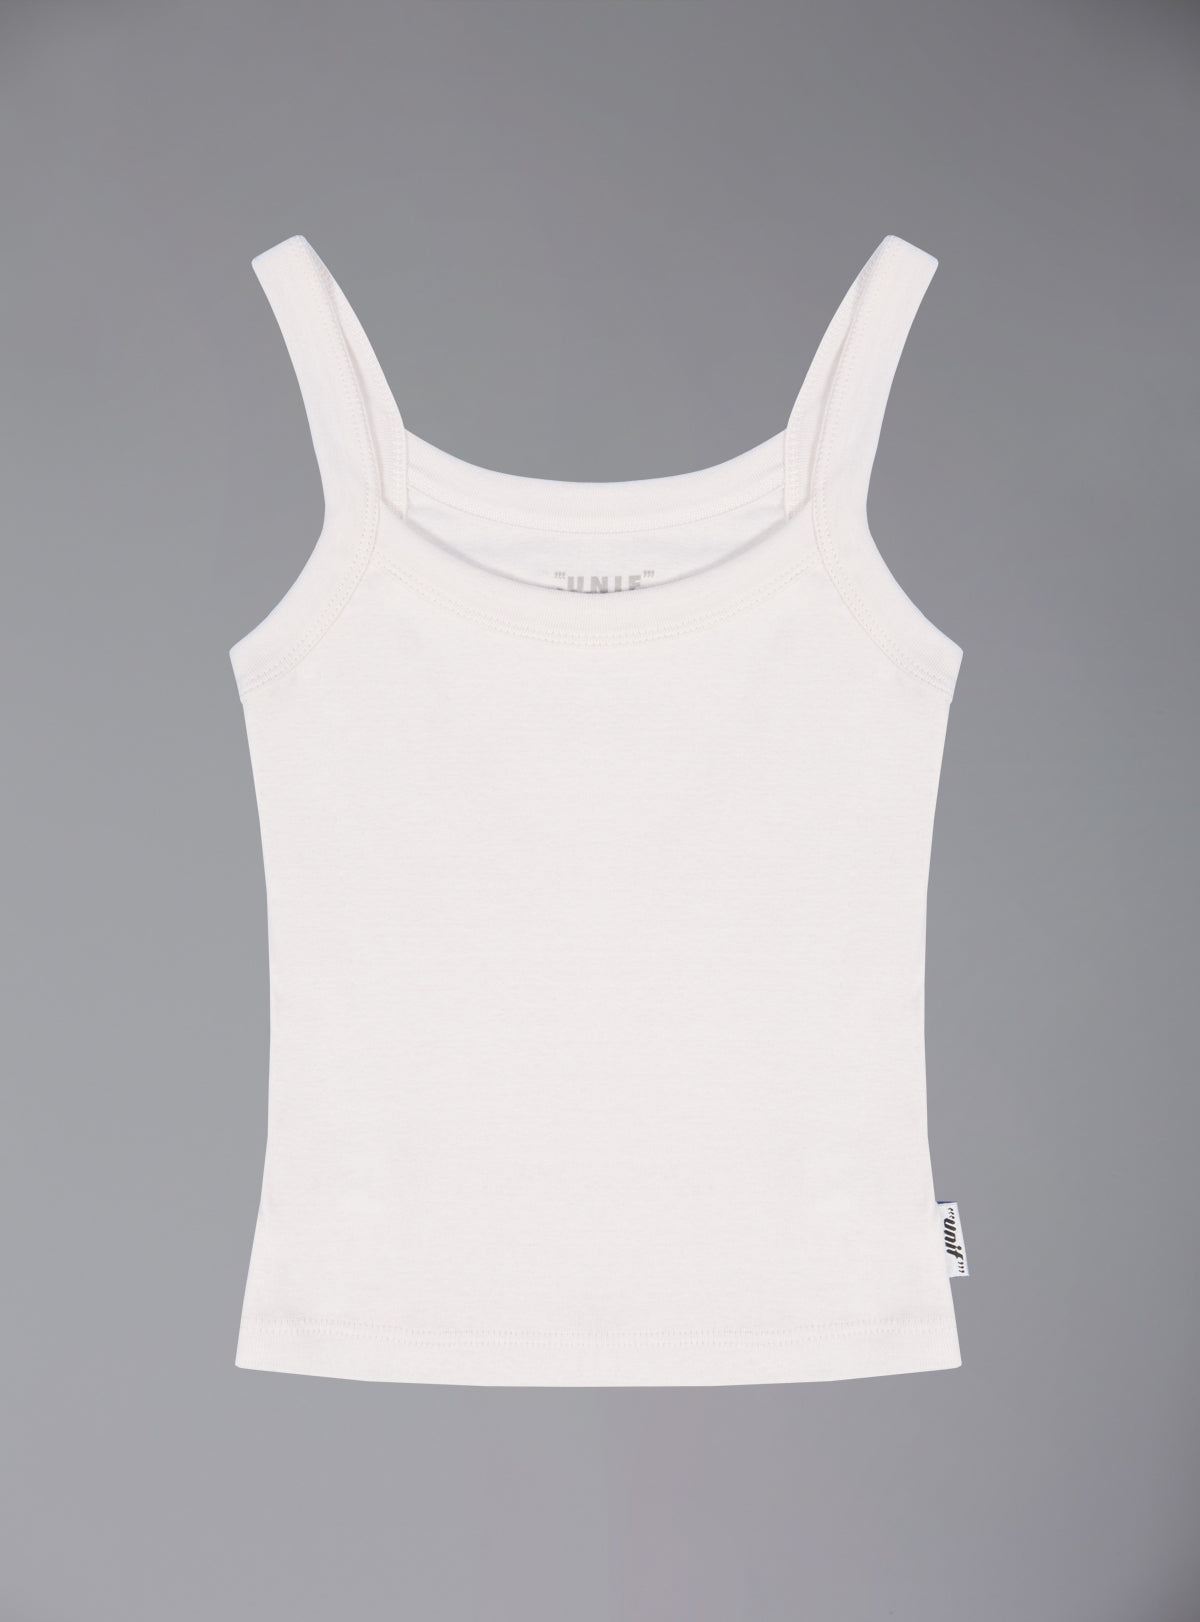 Bow Tank - XS/S / red